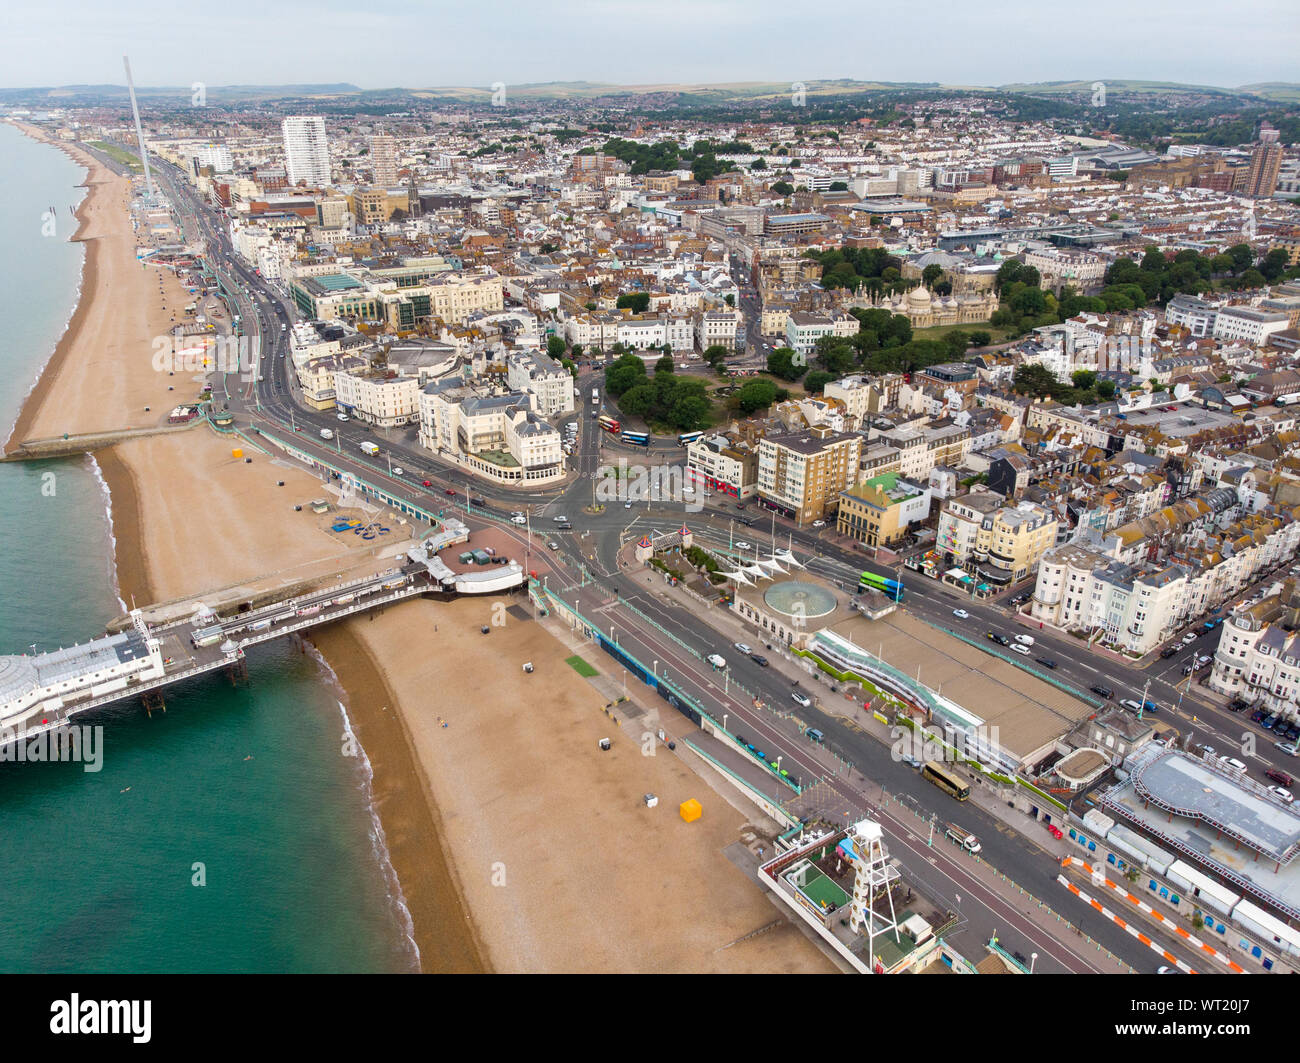 Aerial photo of the Brighton beach and coastal area located in the south coast of England UK that is part of the City of Brighton and Hove, taken on a Stock Photo